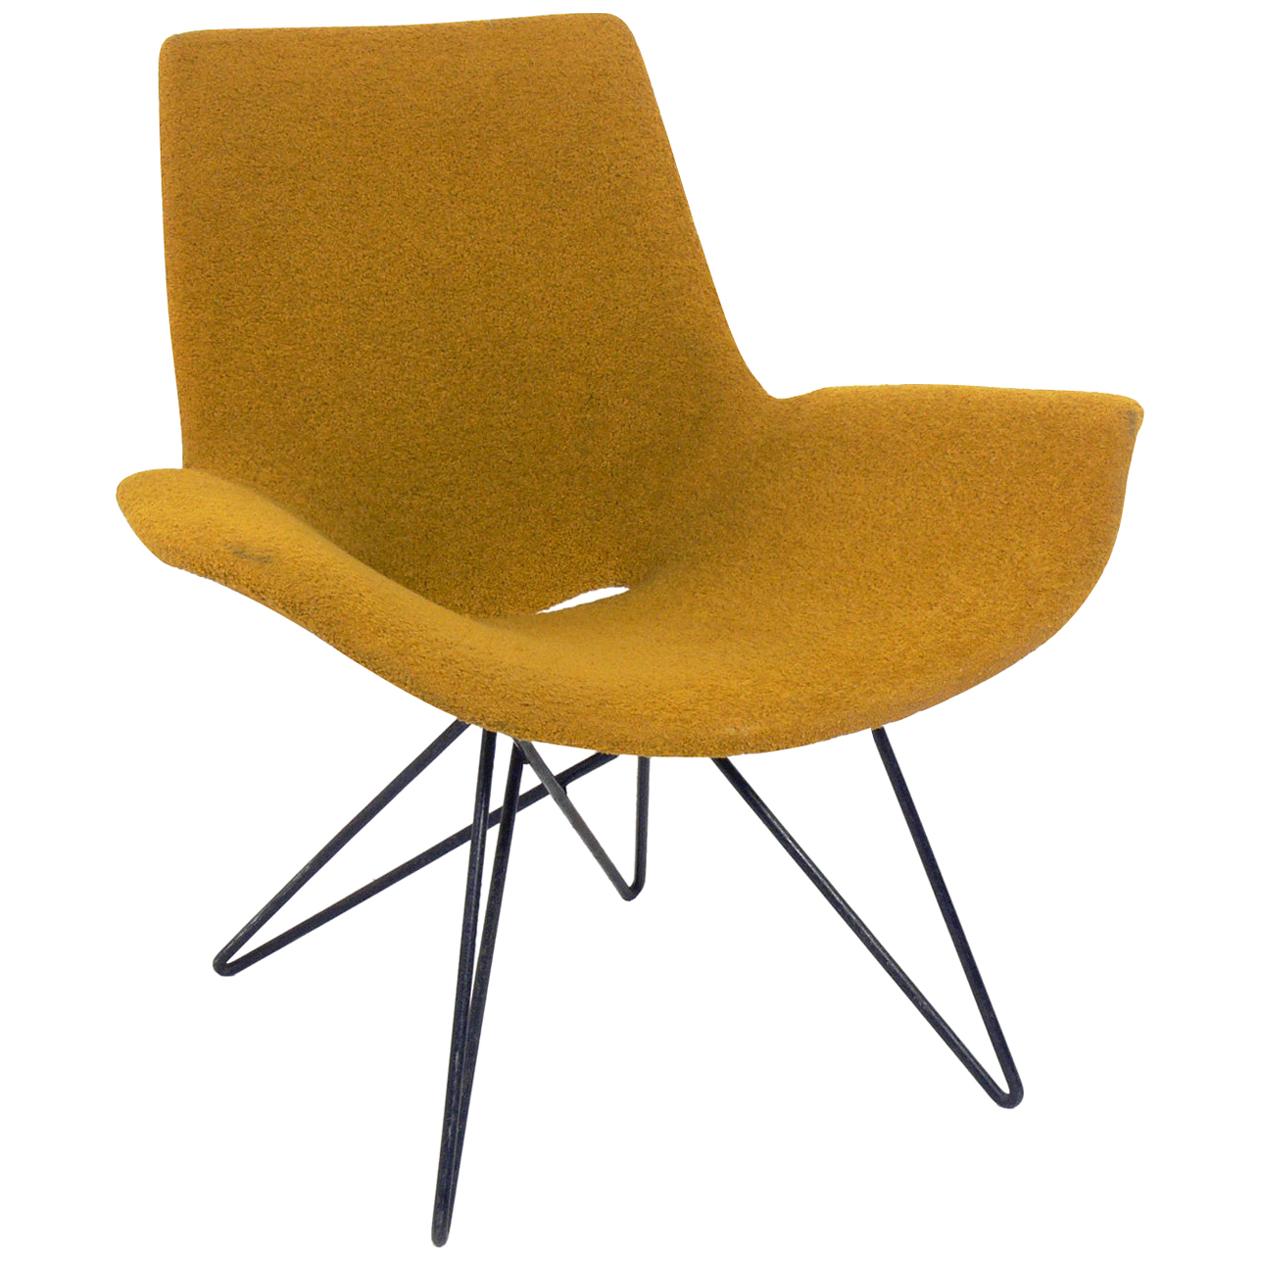 Curvaceous Midcentury Chair Attributed to Martin Eisler